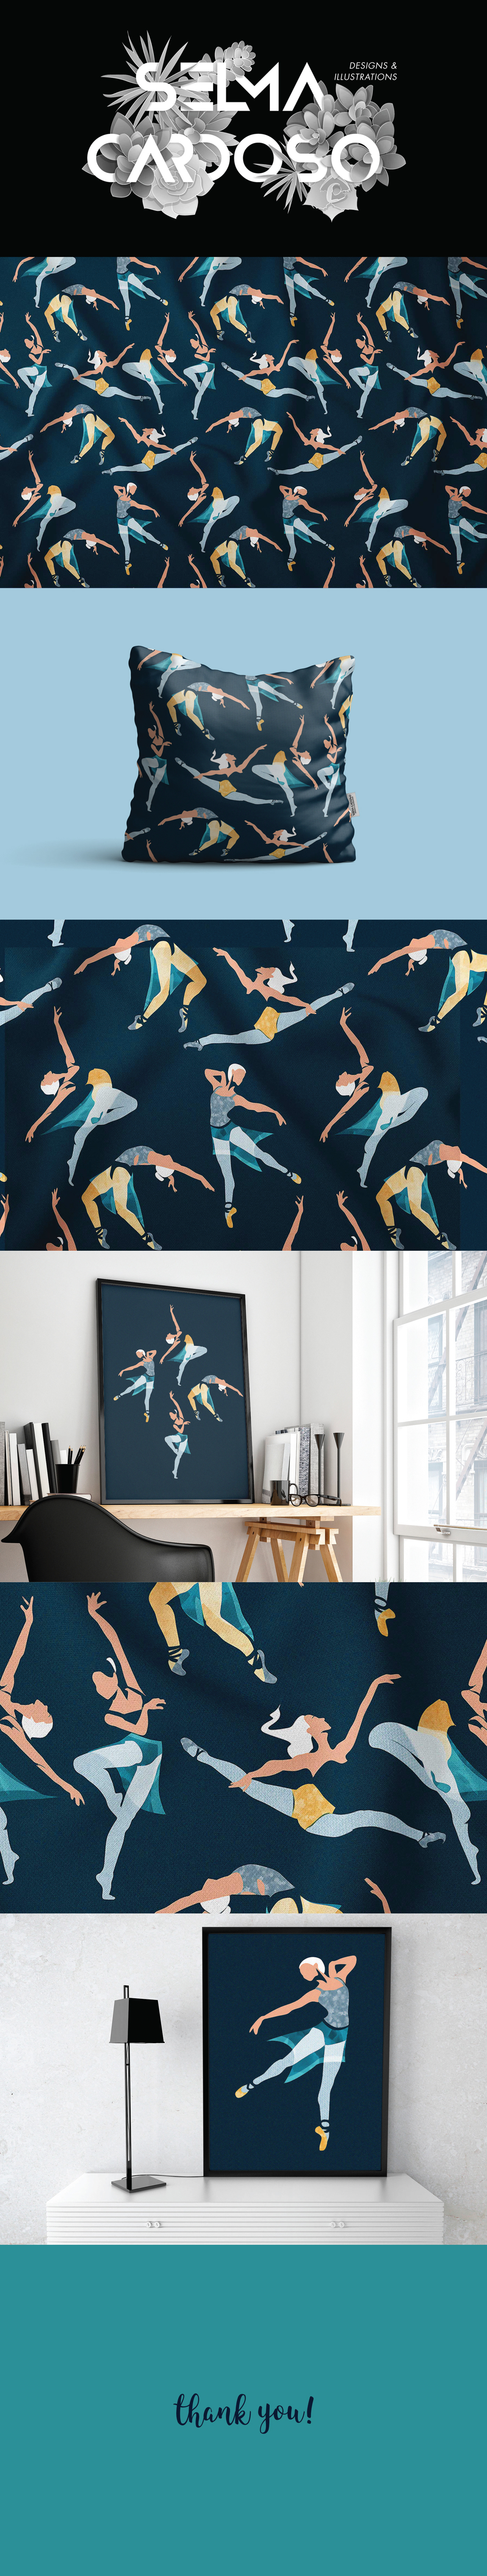 Ballerinas ballet dancers fabric fabric Patterns print Products on demand surface design Surface Pattern textil